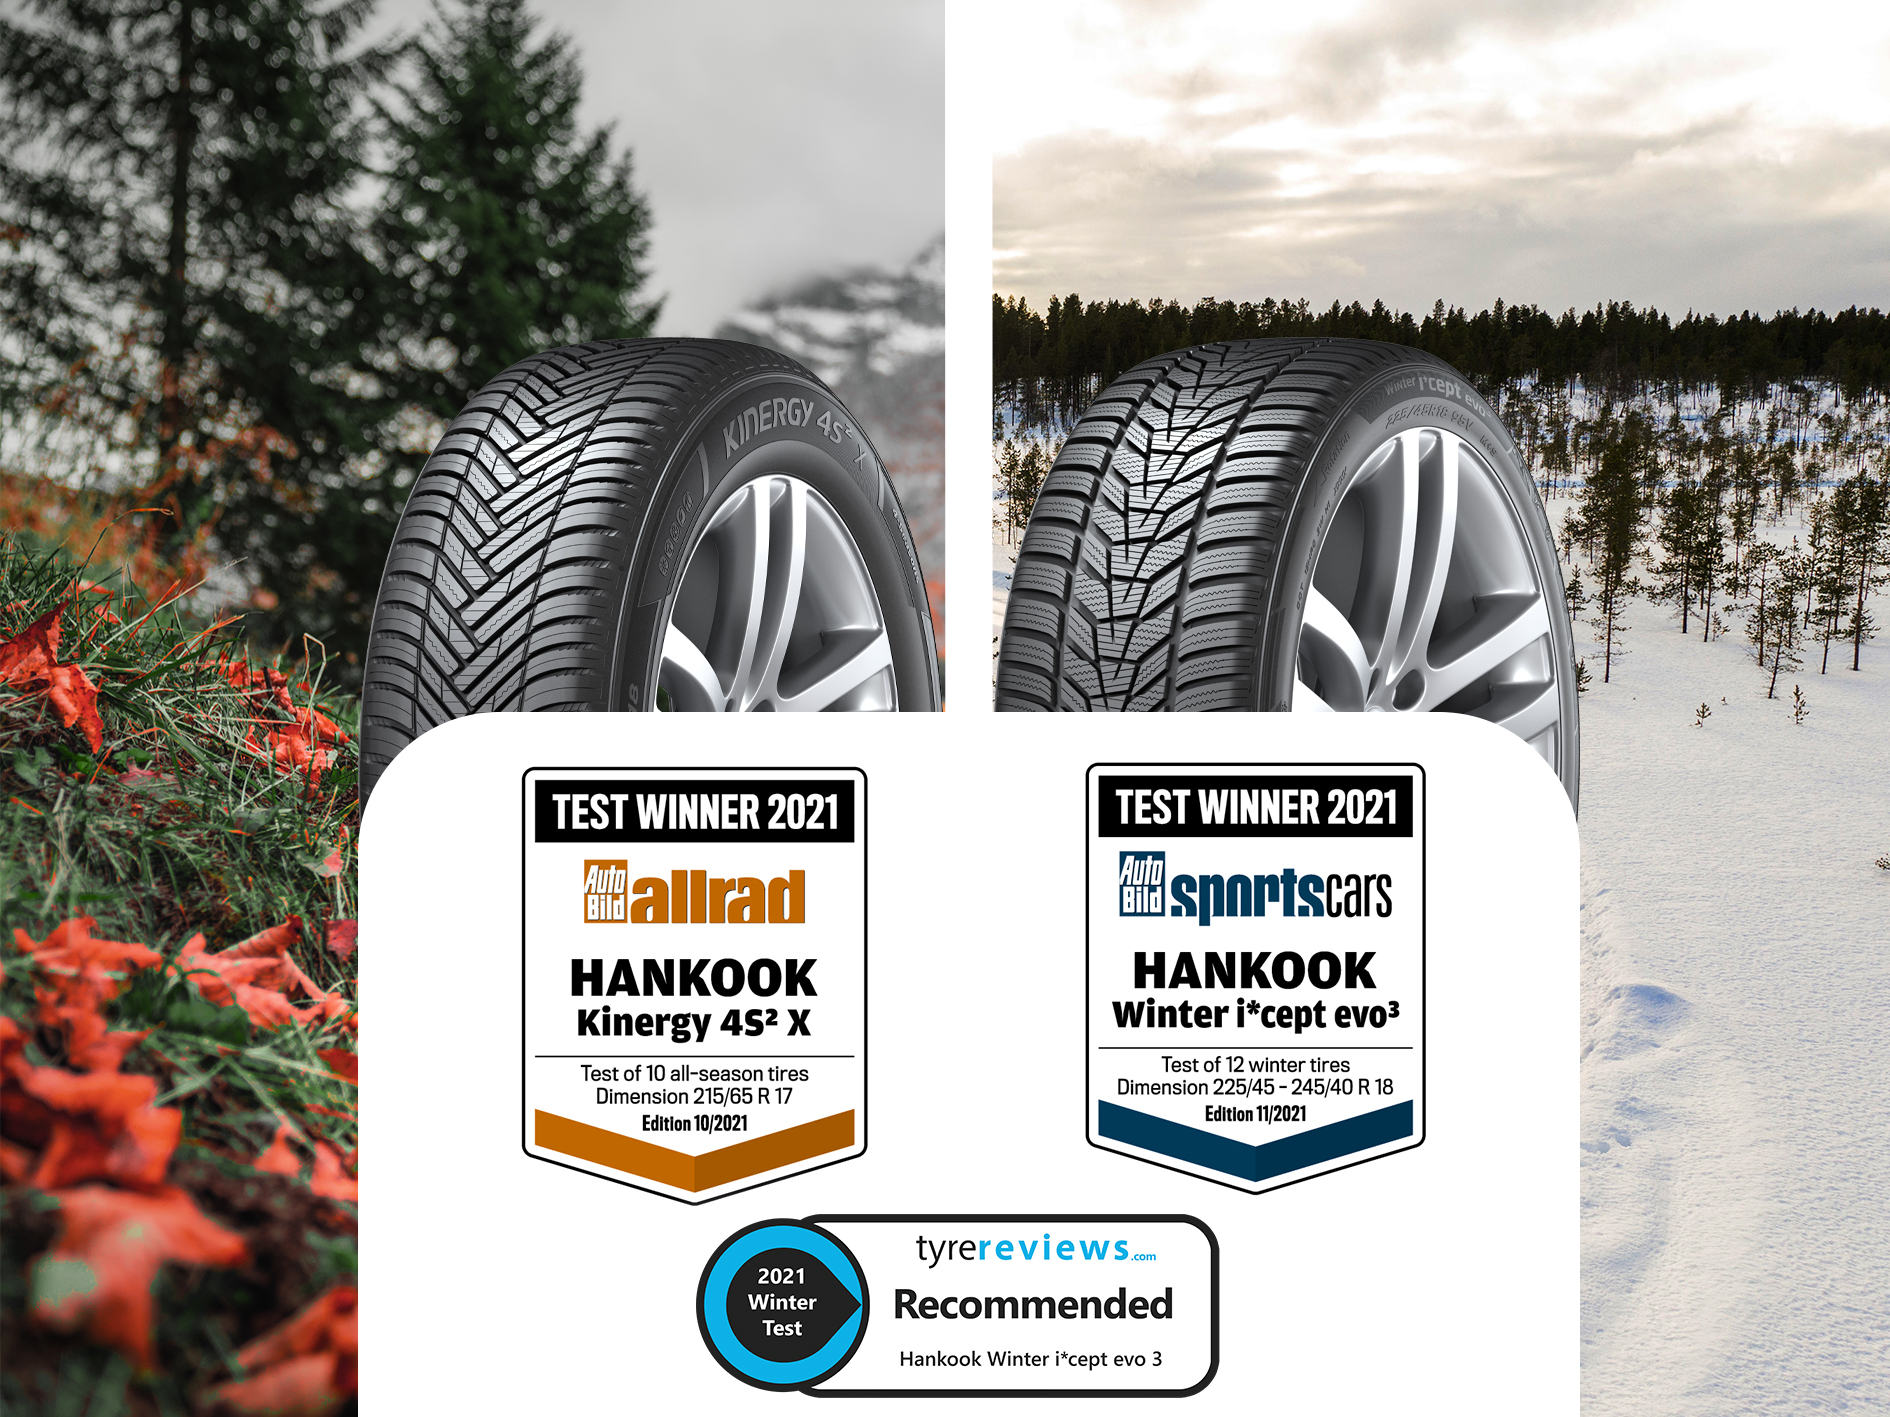 New awards, test wins show quality of Hankook’s winter and all-season tyre ranges